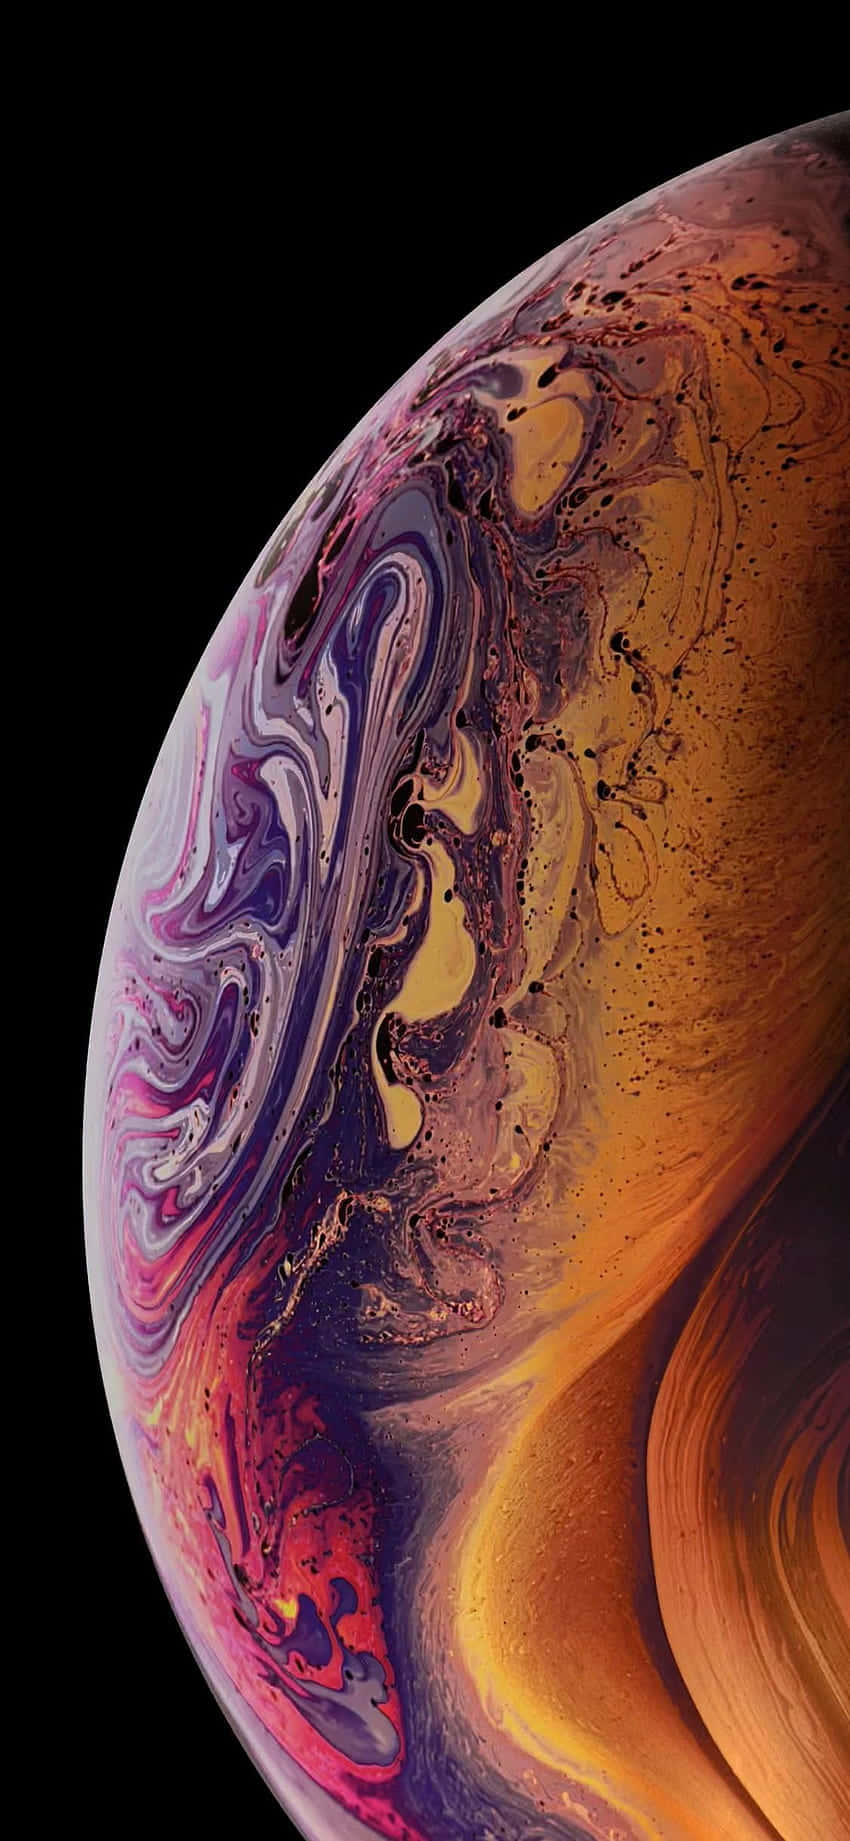 Download Colorful Planet Apple Iphone X Wallpaper | Wallpapers.com